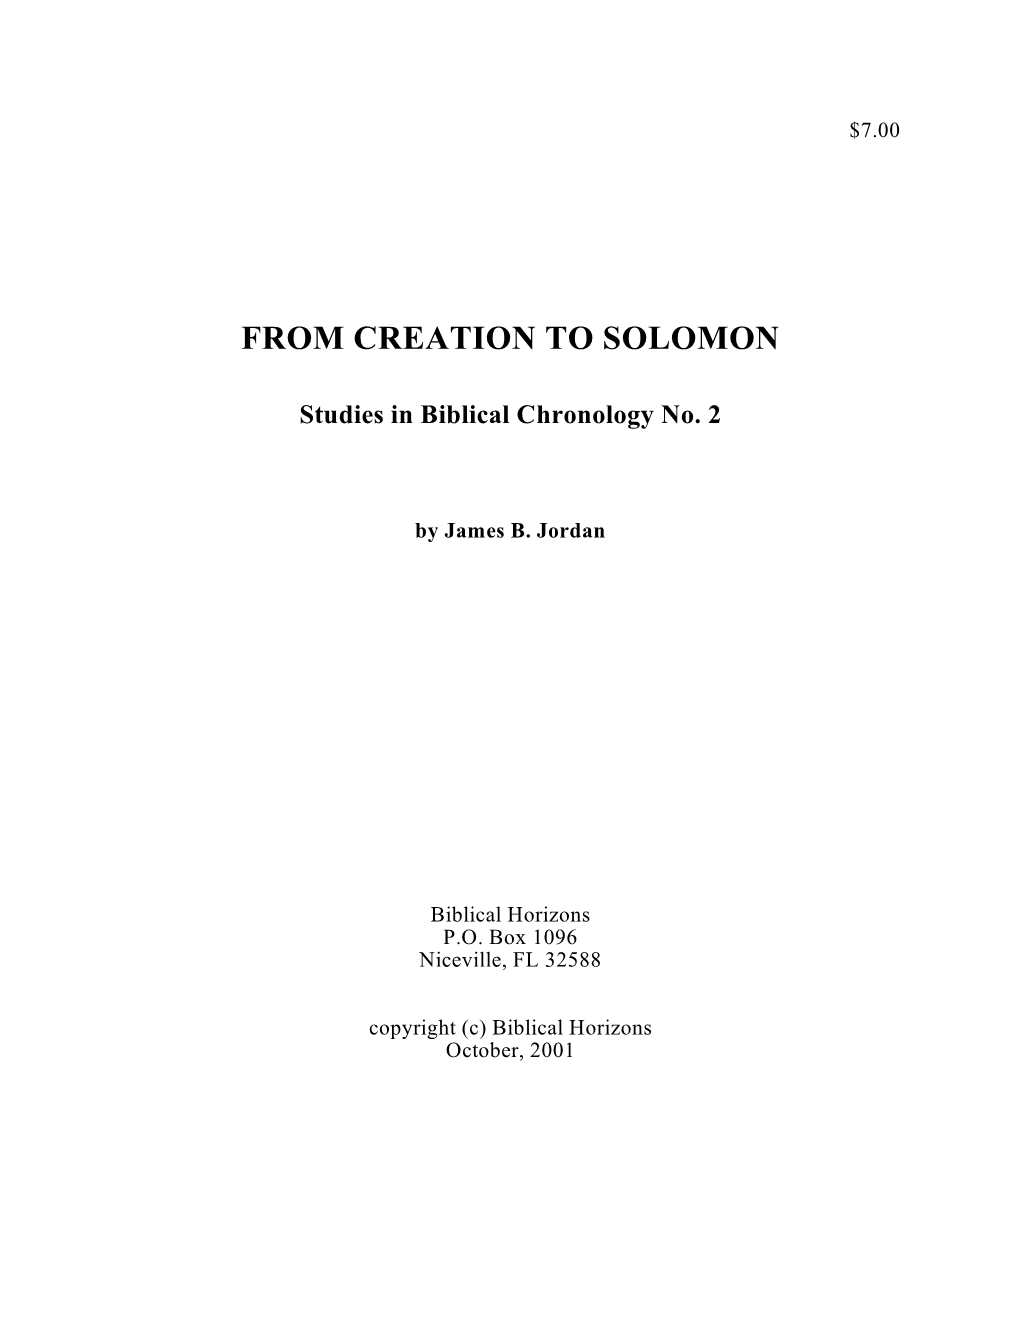 From Creation to Solomon